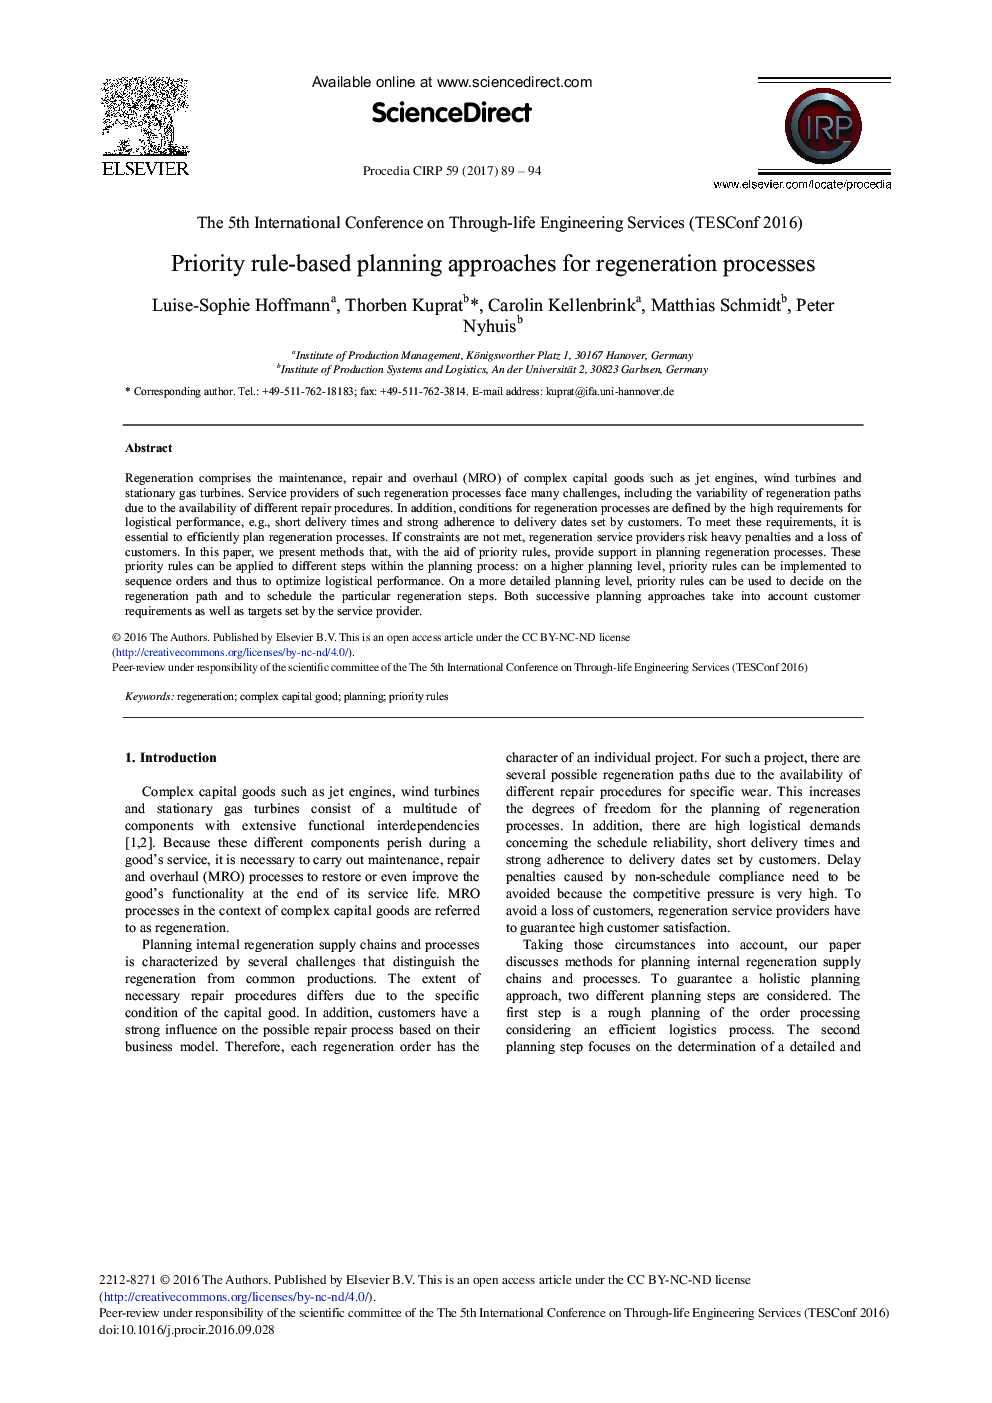 Priority Rule-based Planning Approaches for Regeneration Processes